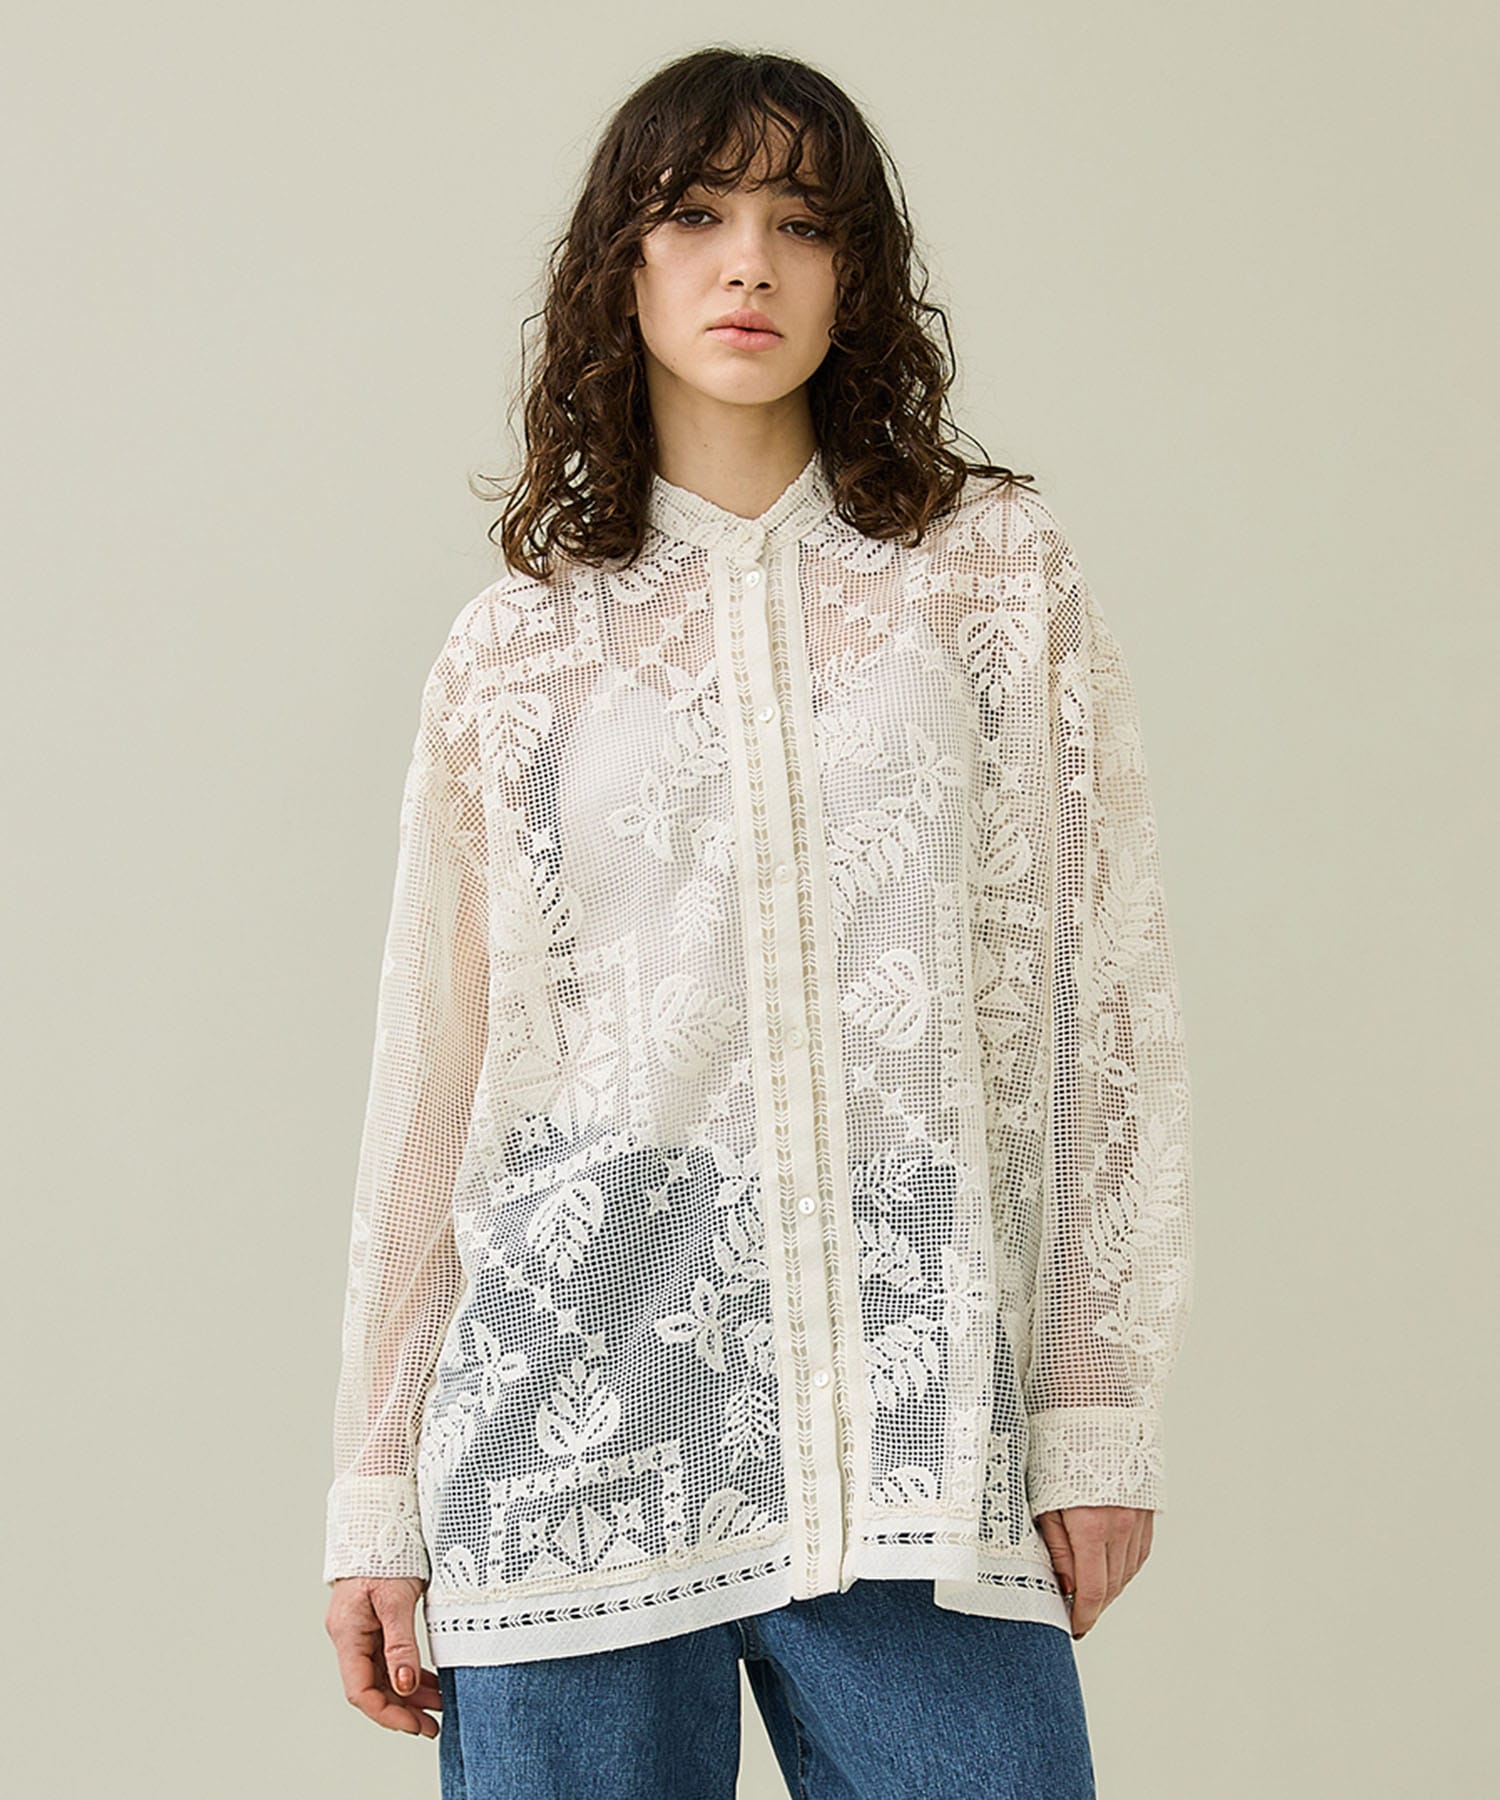 CHEMICAL LACE OVER SHIRT(FREE OFF WHITE): AMERI: WOMENS｜ STUDIOUS 